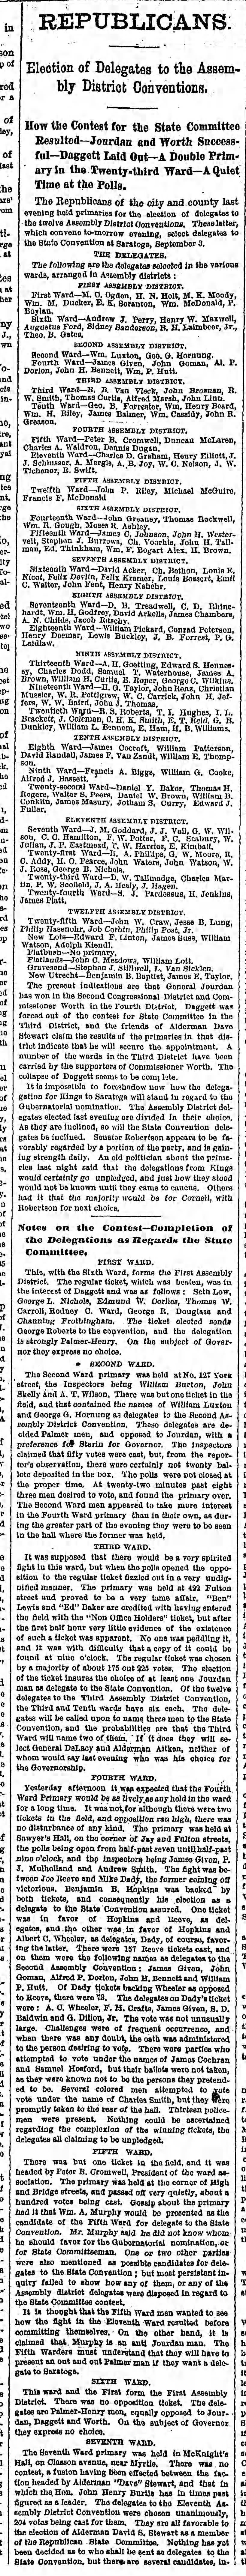 Wednesday, August 27, 1879 - Page 2 might be long